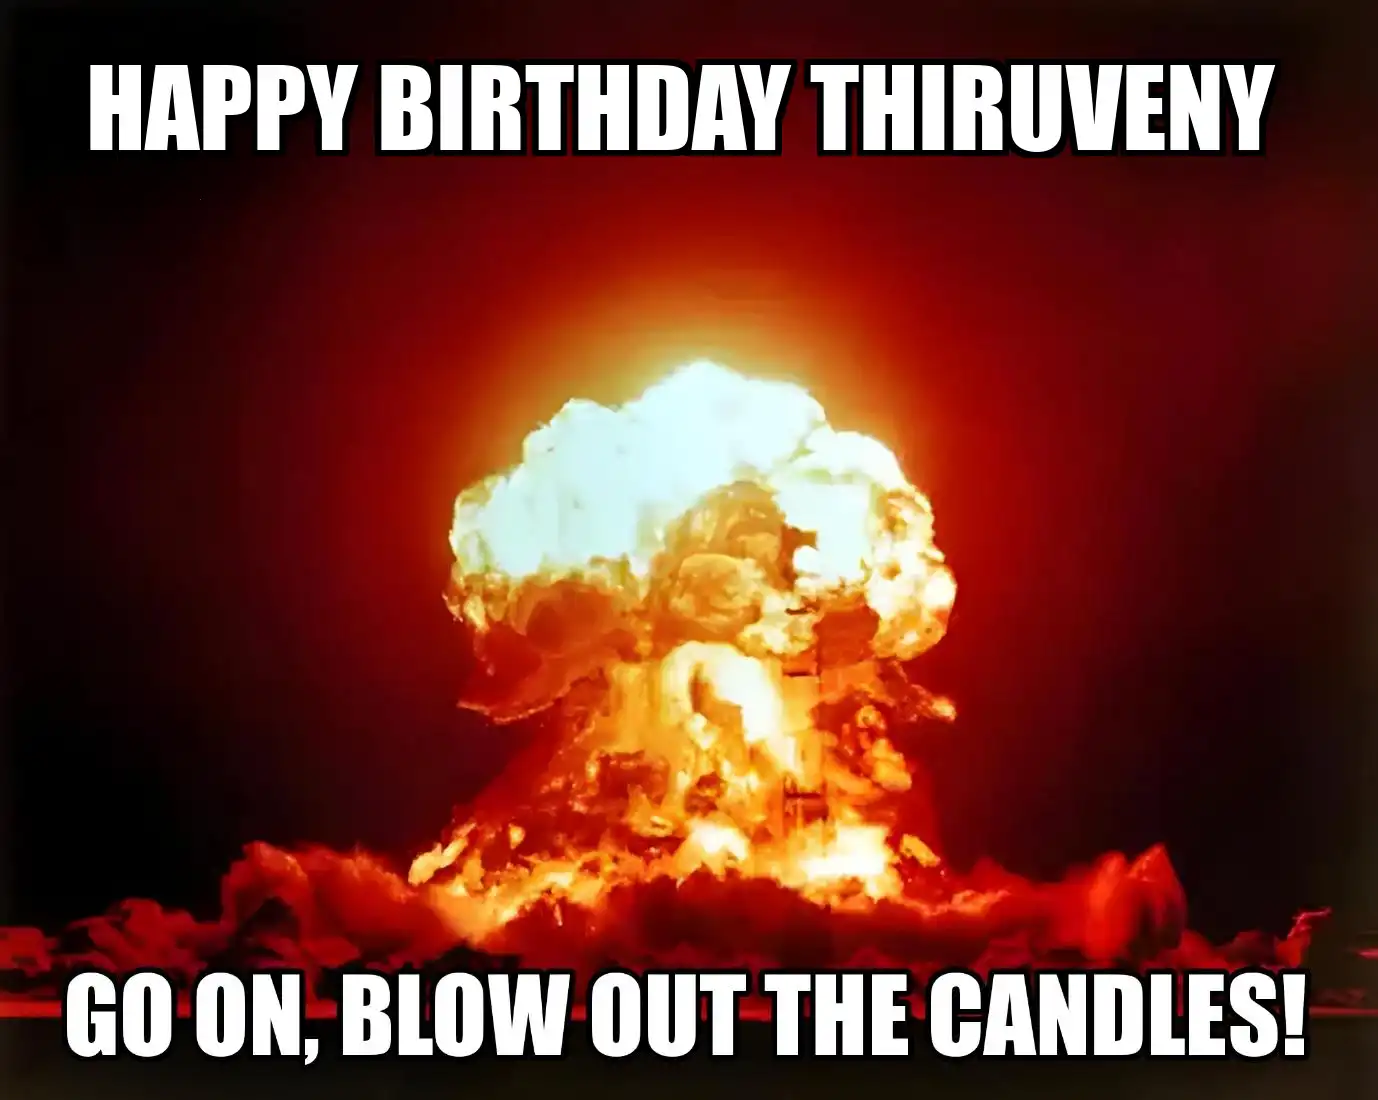 Happy Birthday Thiruveny Go On Blow Out The Candles Meme